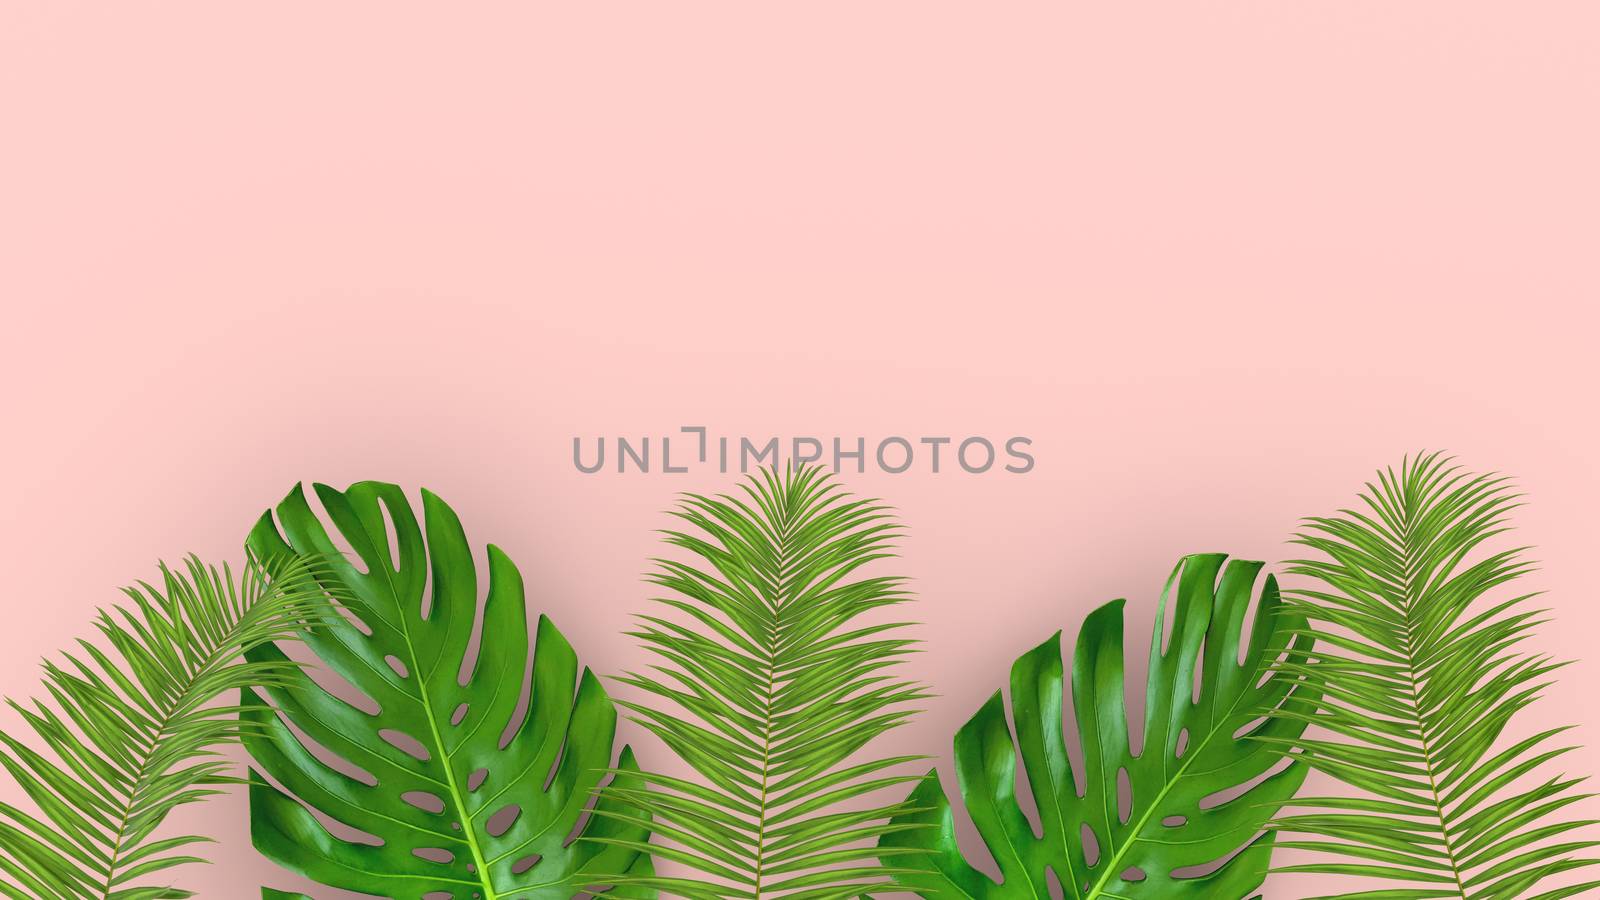 3D render of realistic palm leaves on pink background for cosmetic ad or fashion illustration. Tropical frame exotic banana palm. by Shanvood